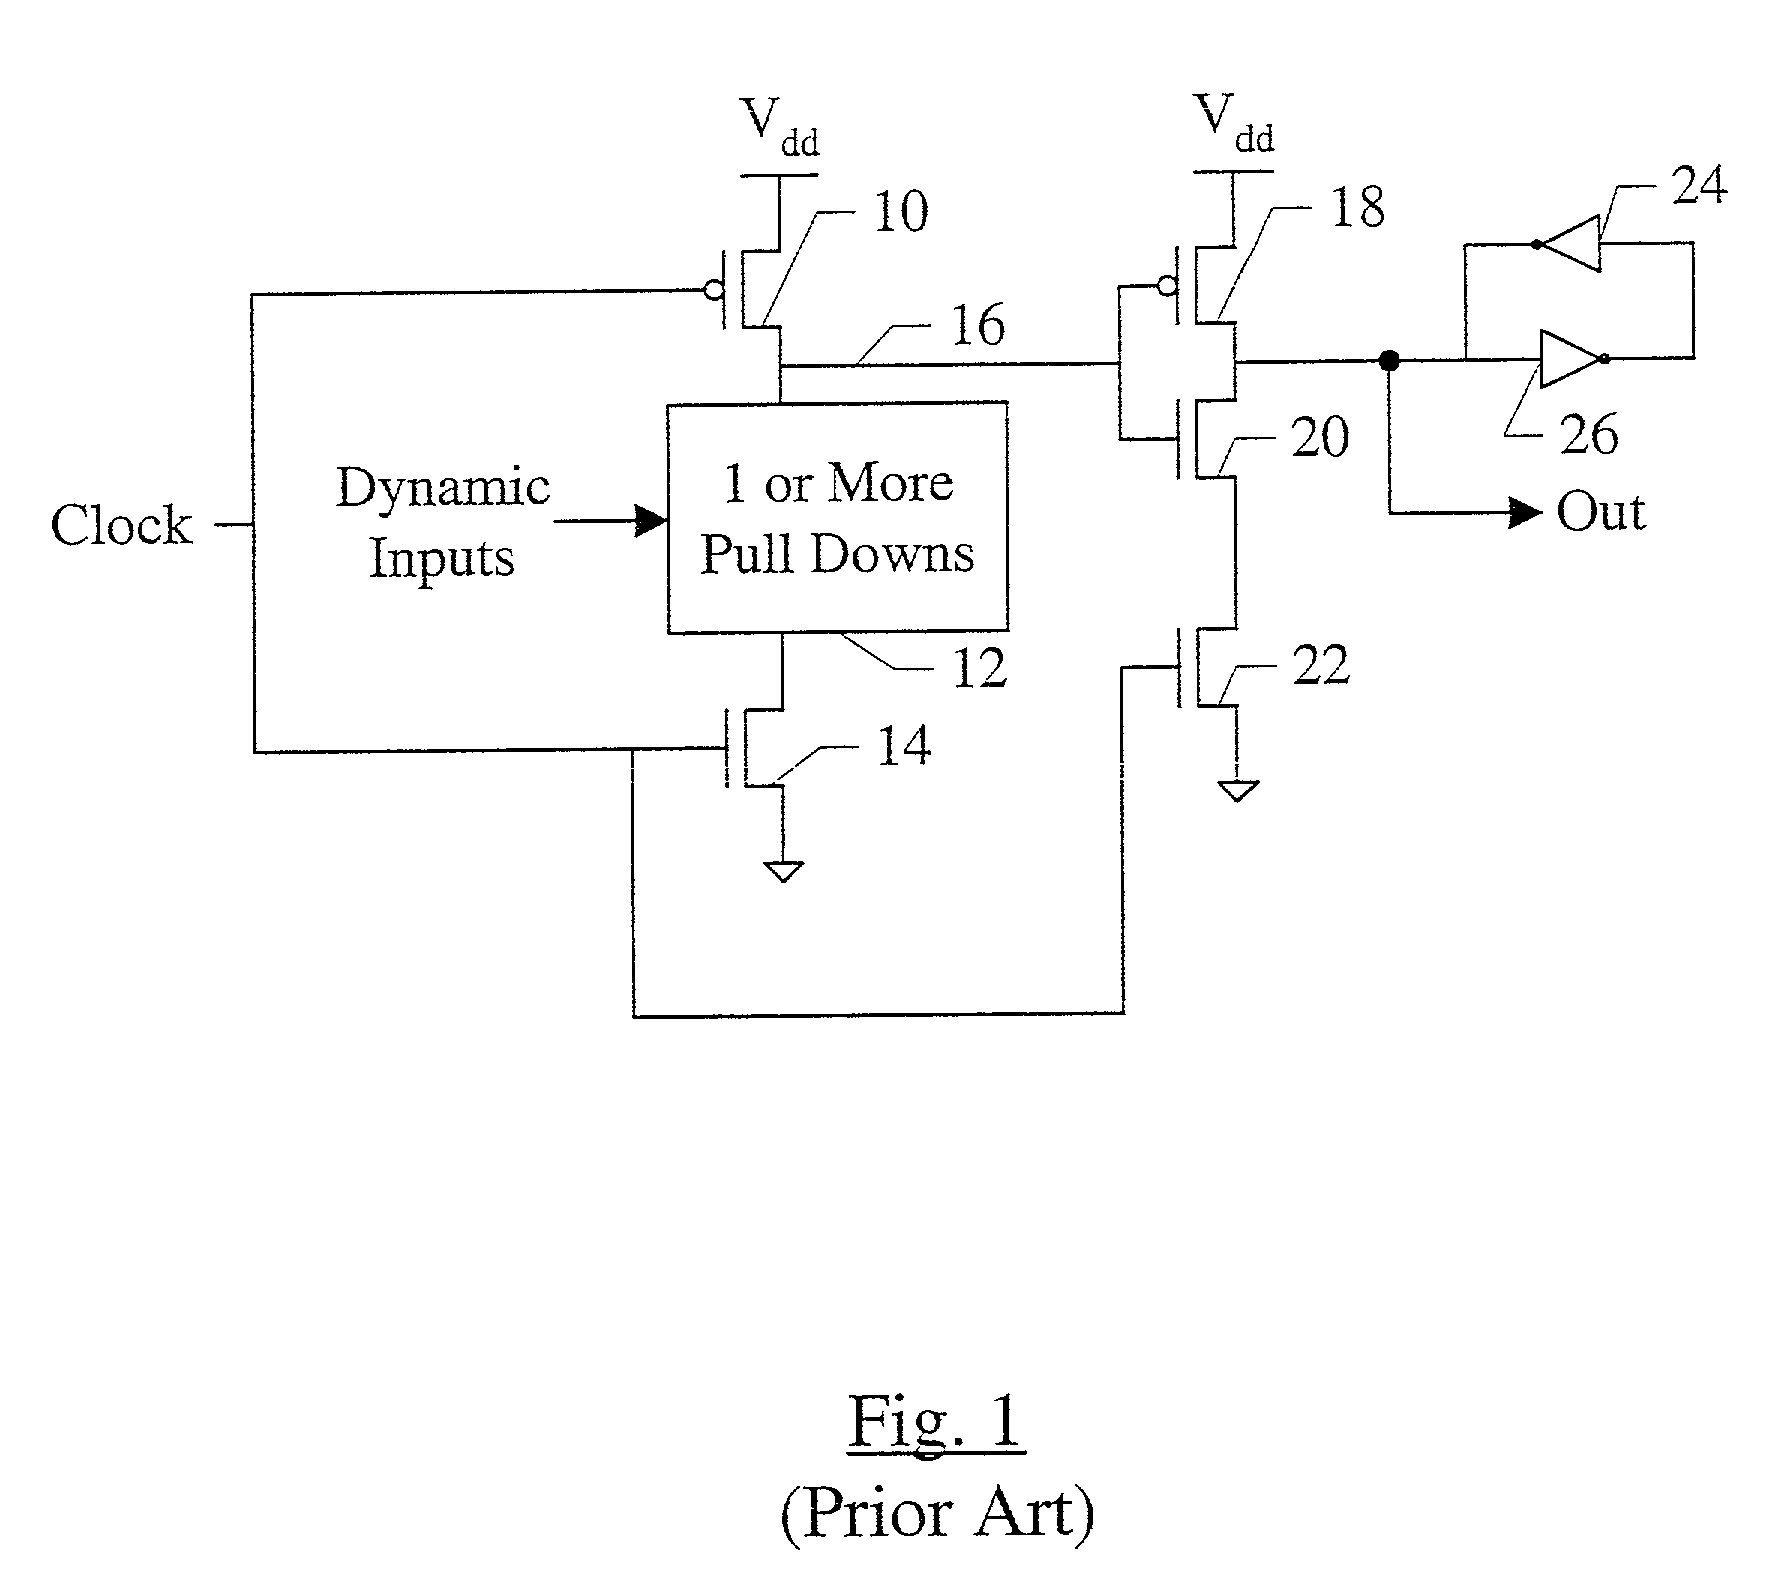 Dynamic to Static converter with noise suppression